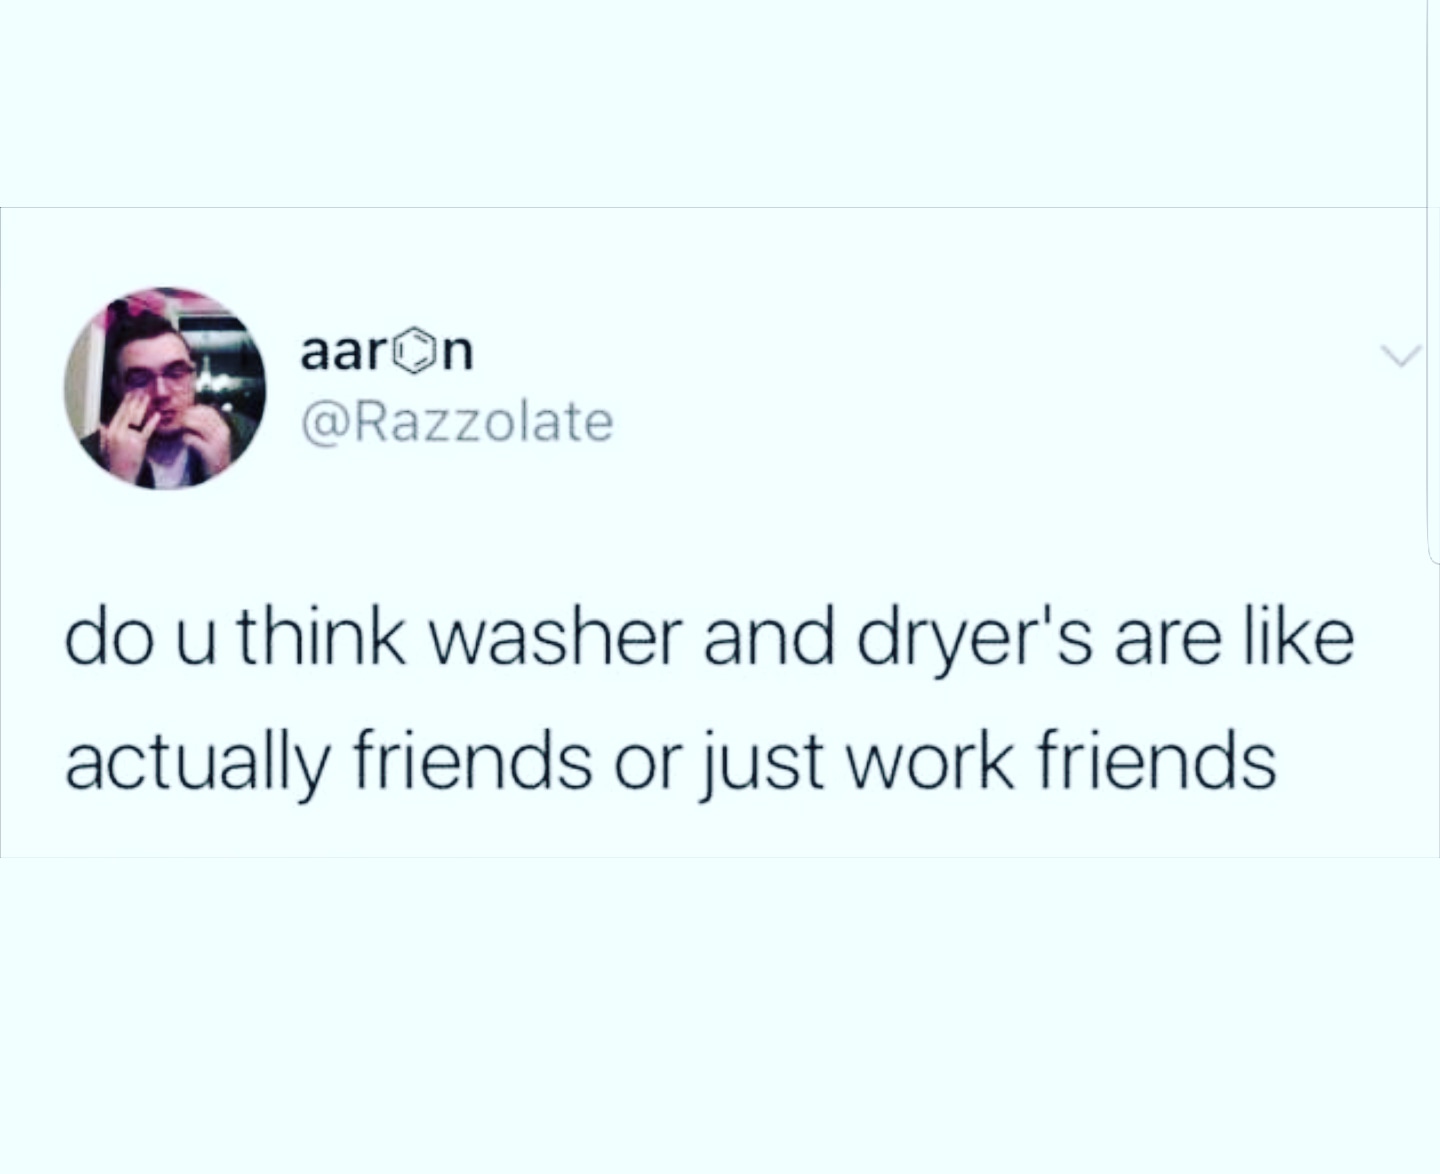 dank meme - washing machine dryer work friends meme - aaron do u think washer and dryer's are actually friends or just work friends